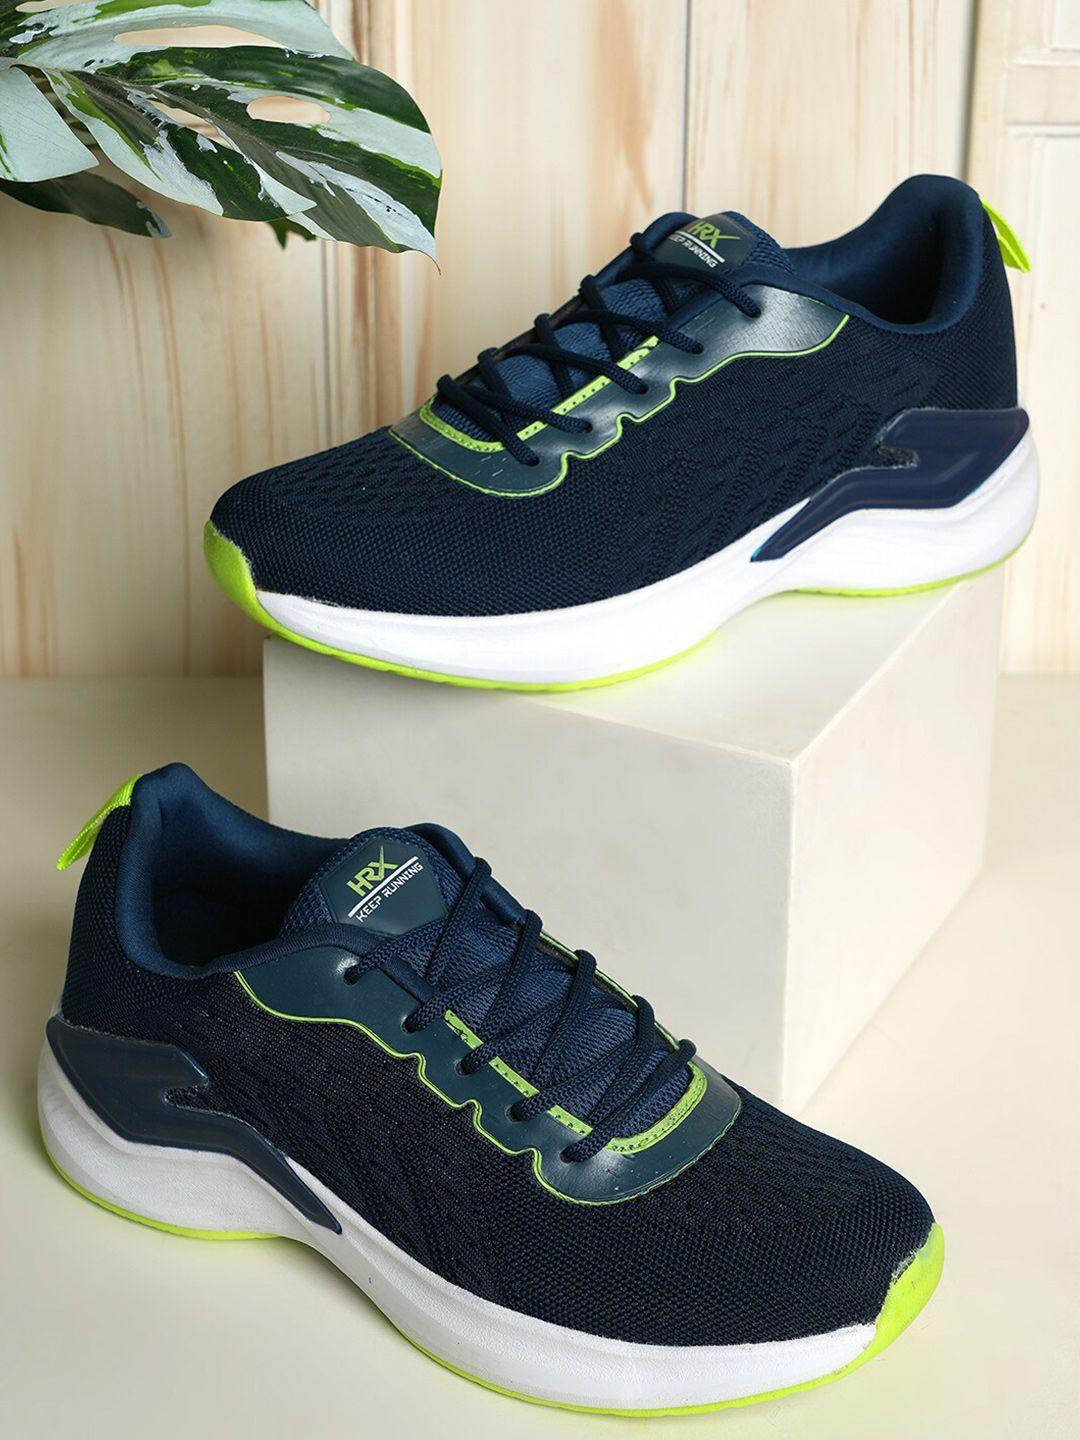 hrx by hrithik roshan men teal blue & fluorescent green lace-up walking shoes